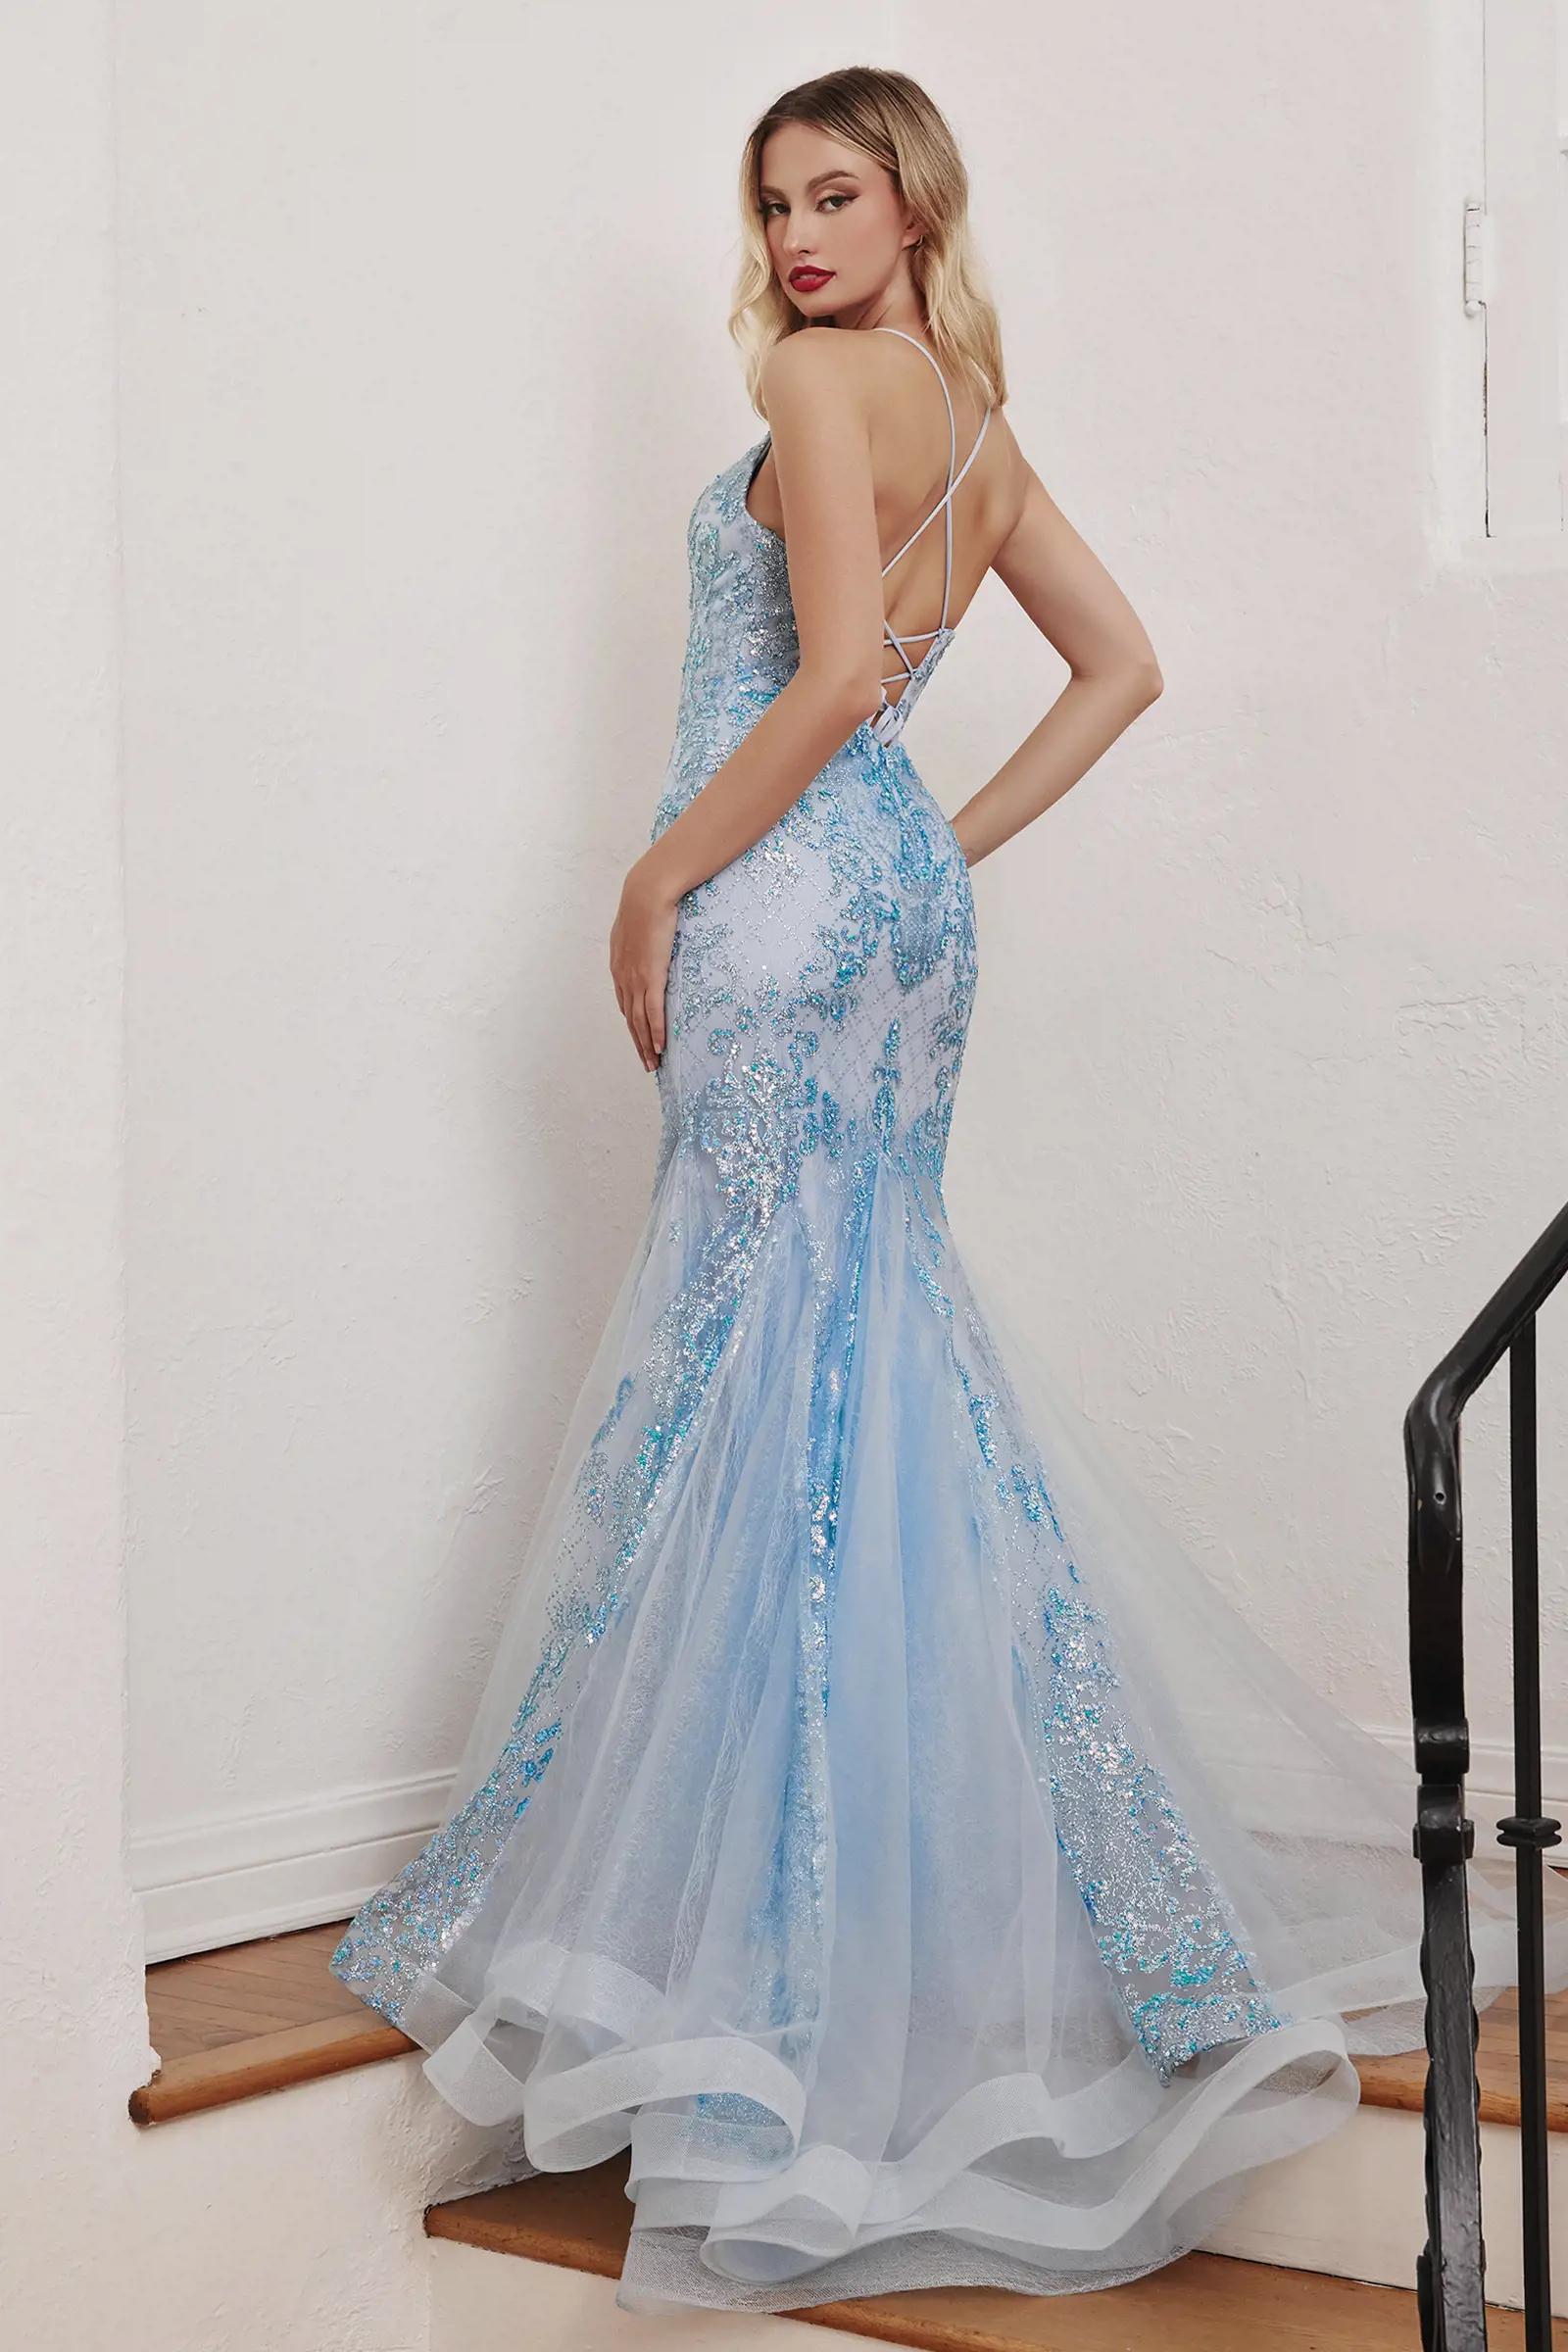 Model wearing a Mermaid evening gown